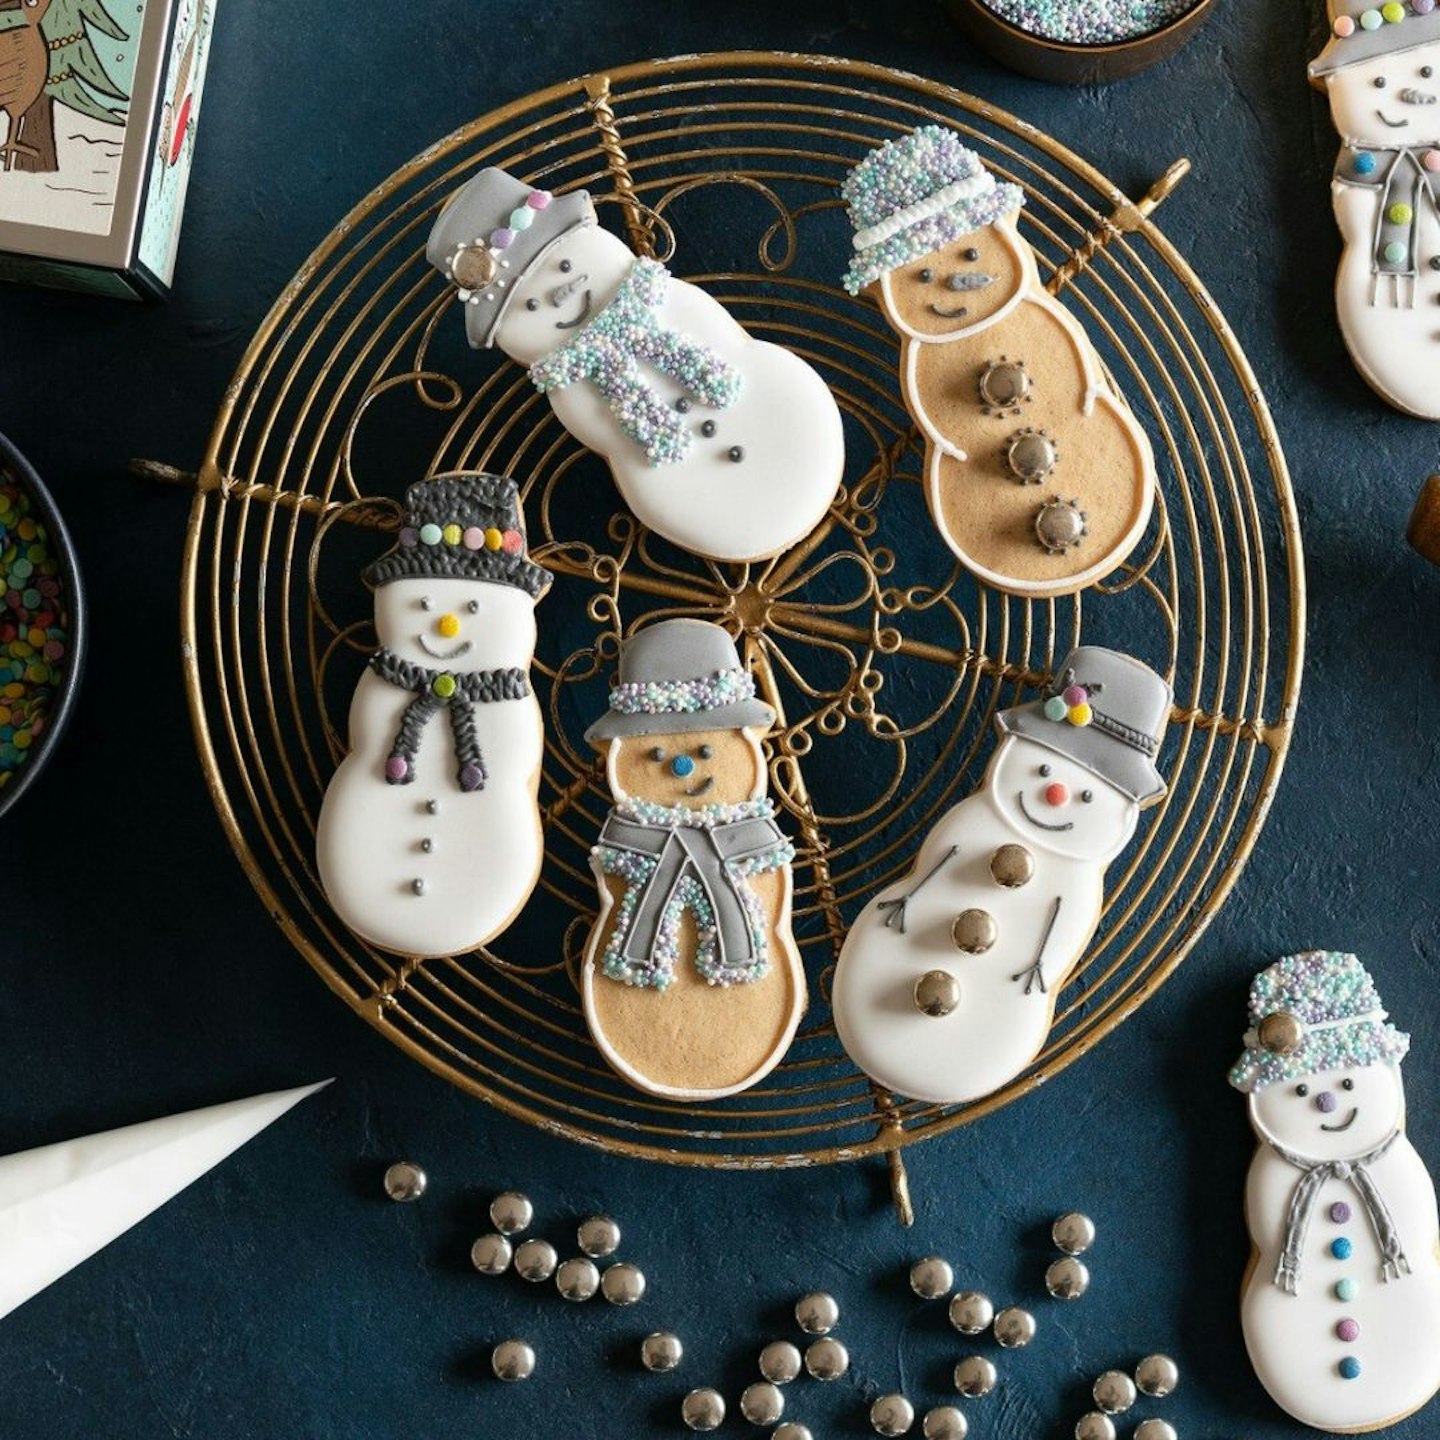 The Best Cookie Decorating Kits of 2023